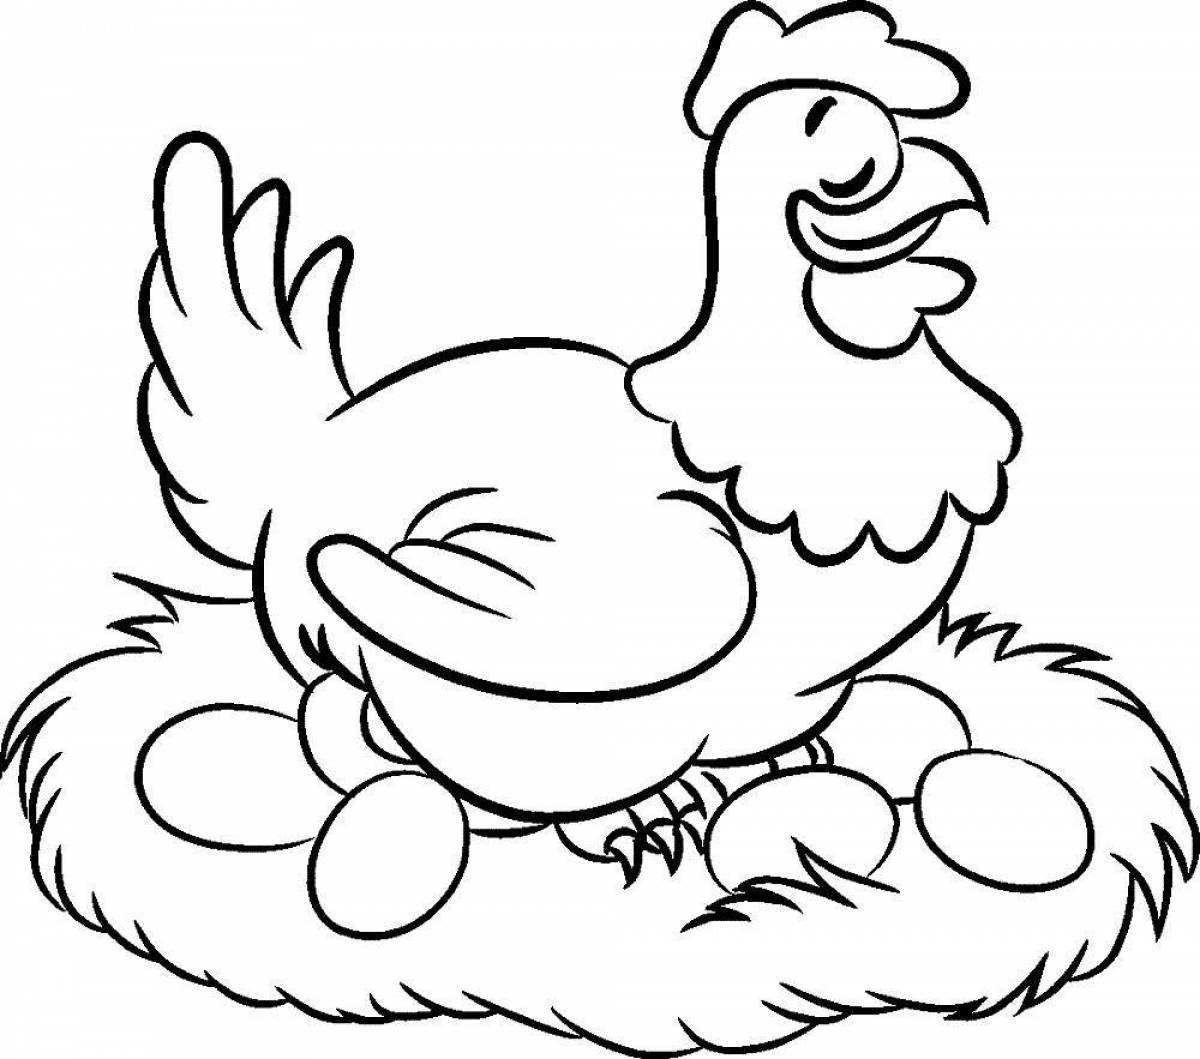 Chicken fun coloring book for preschoolers 2-3 years old